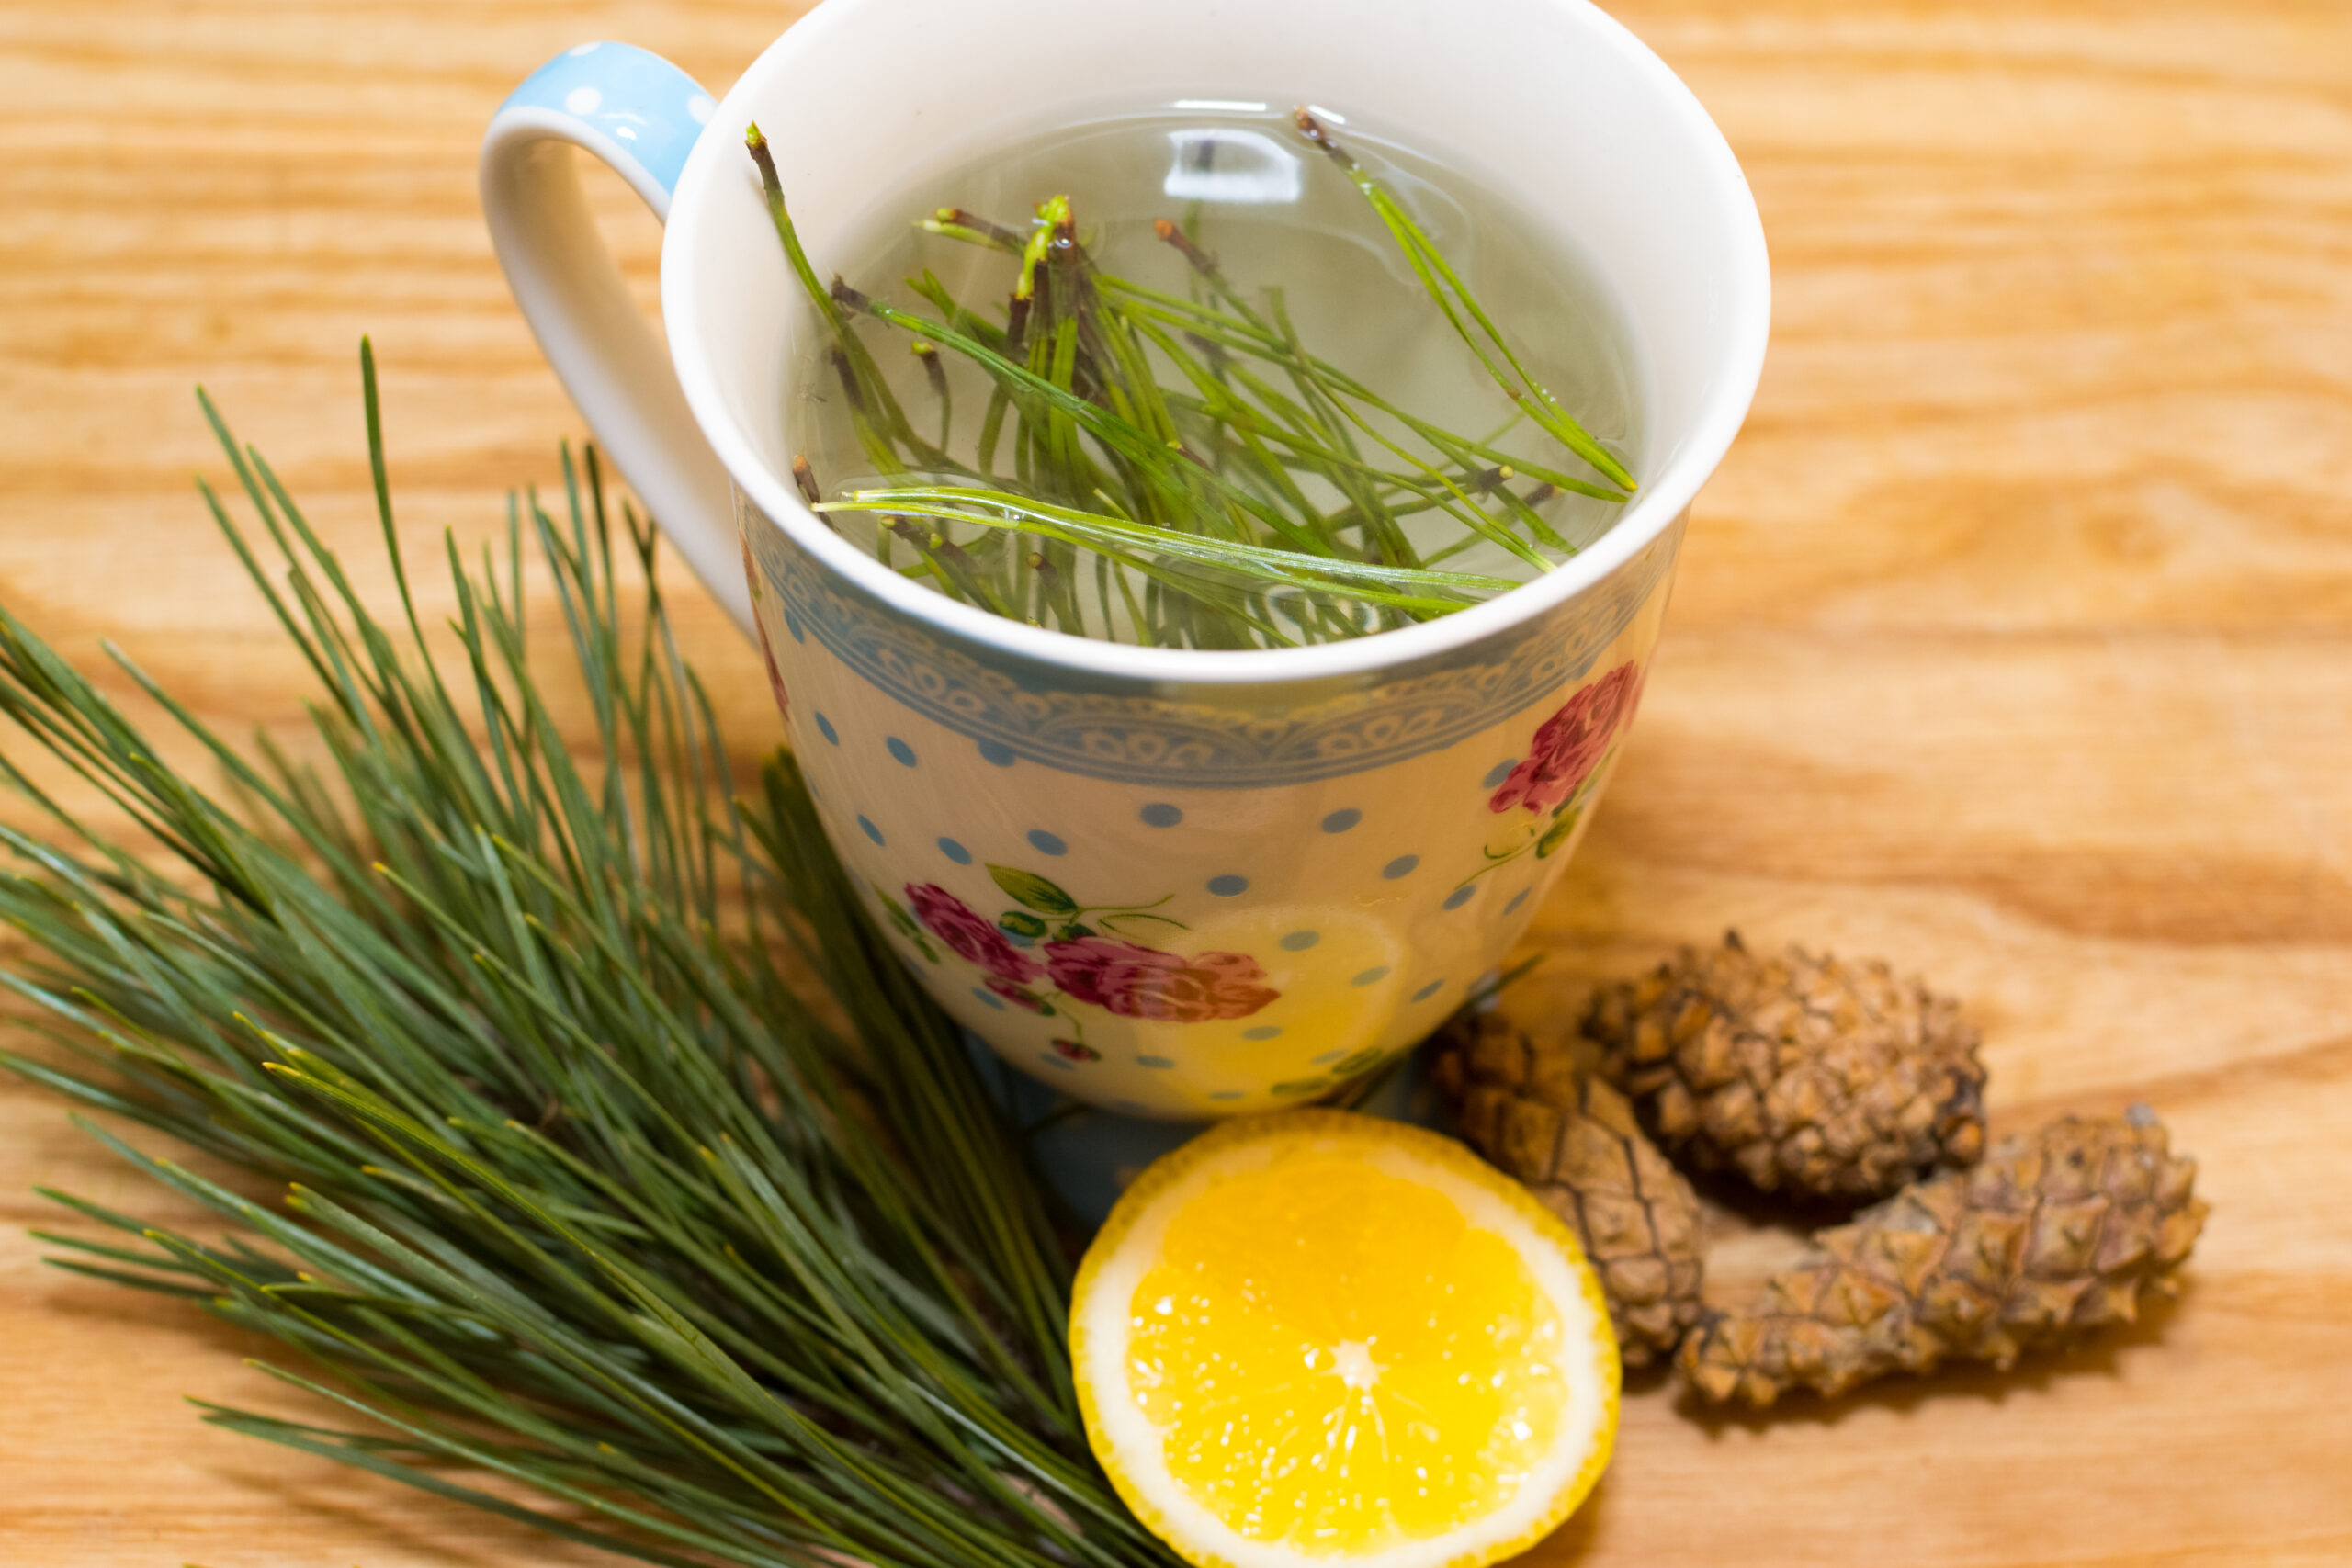 Pine Needle Tea Safety & Other Pine Remedies for COVID mRNA Vaccine Shedding